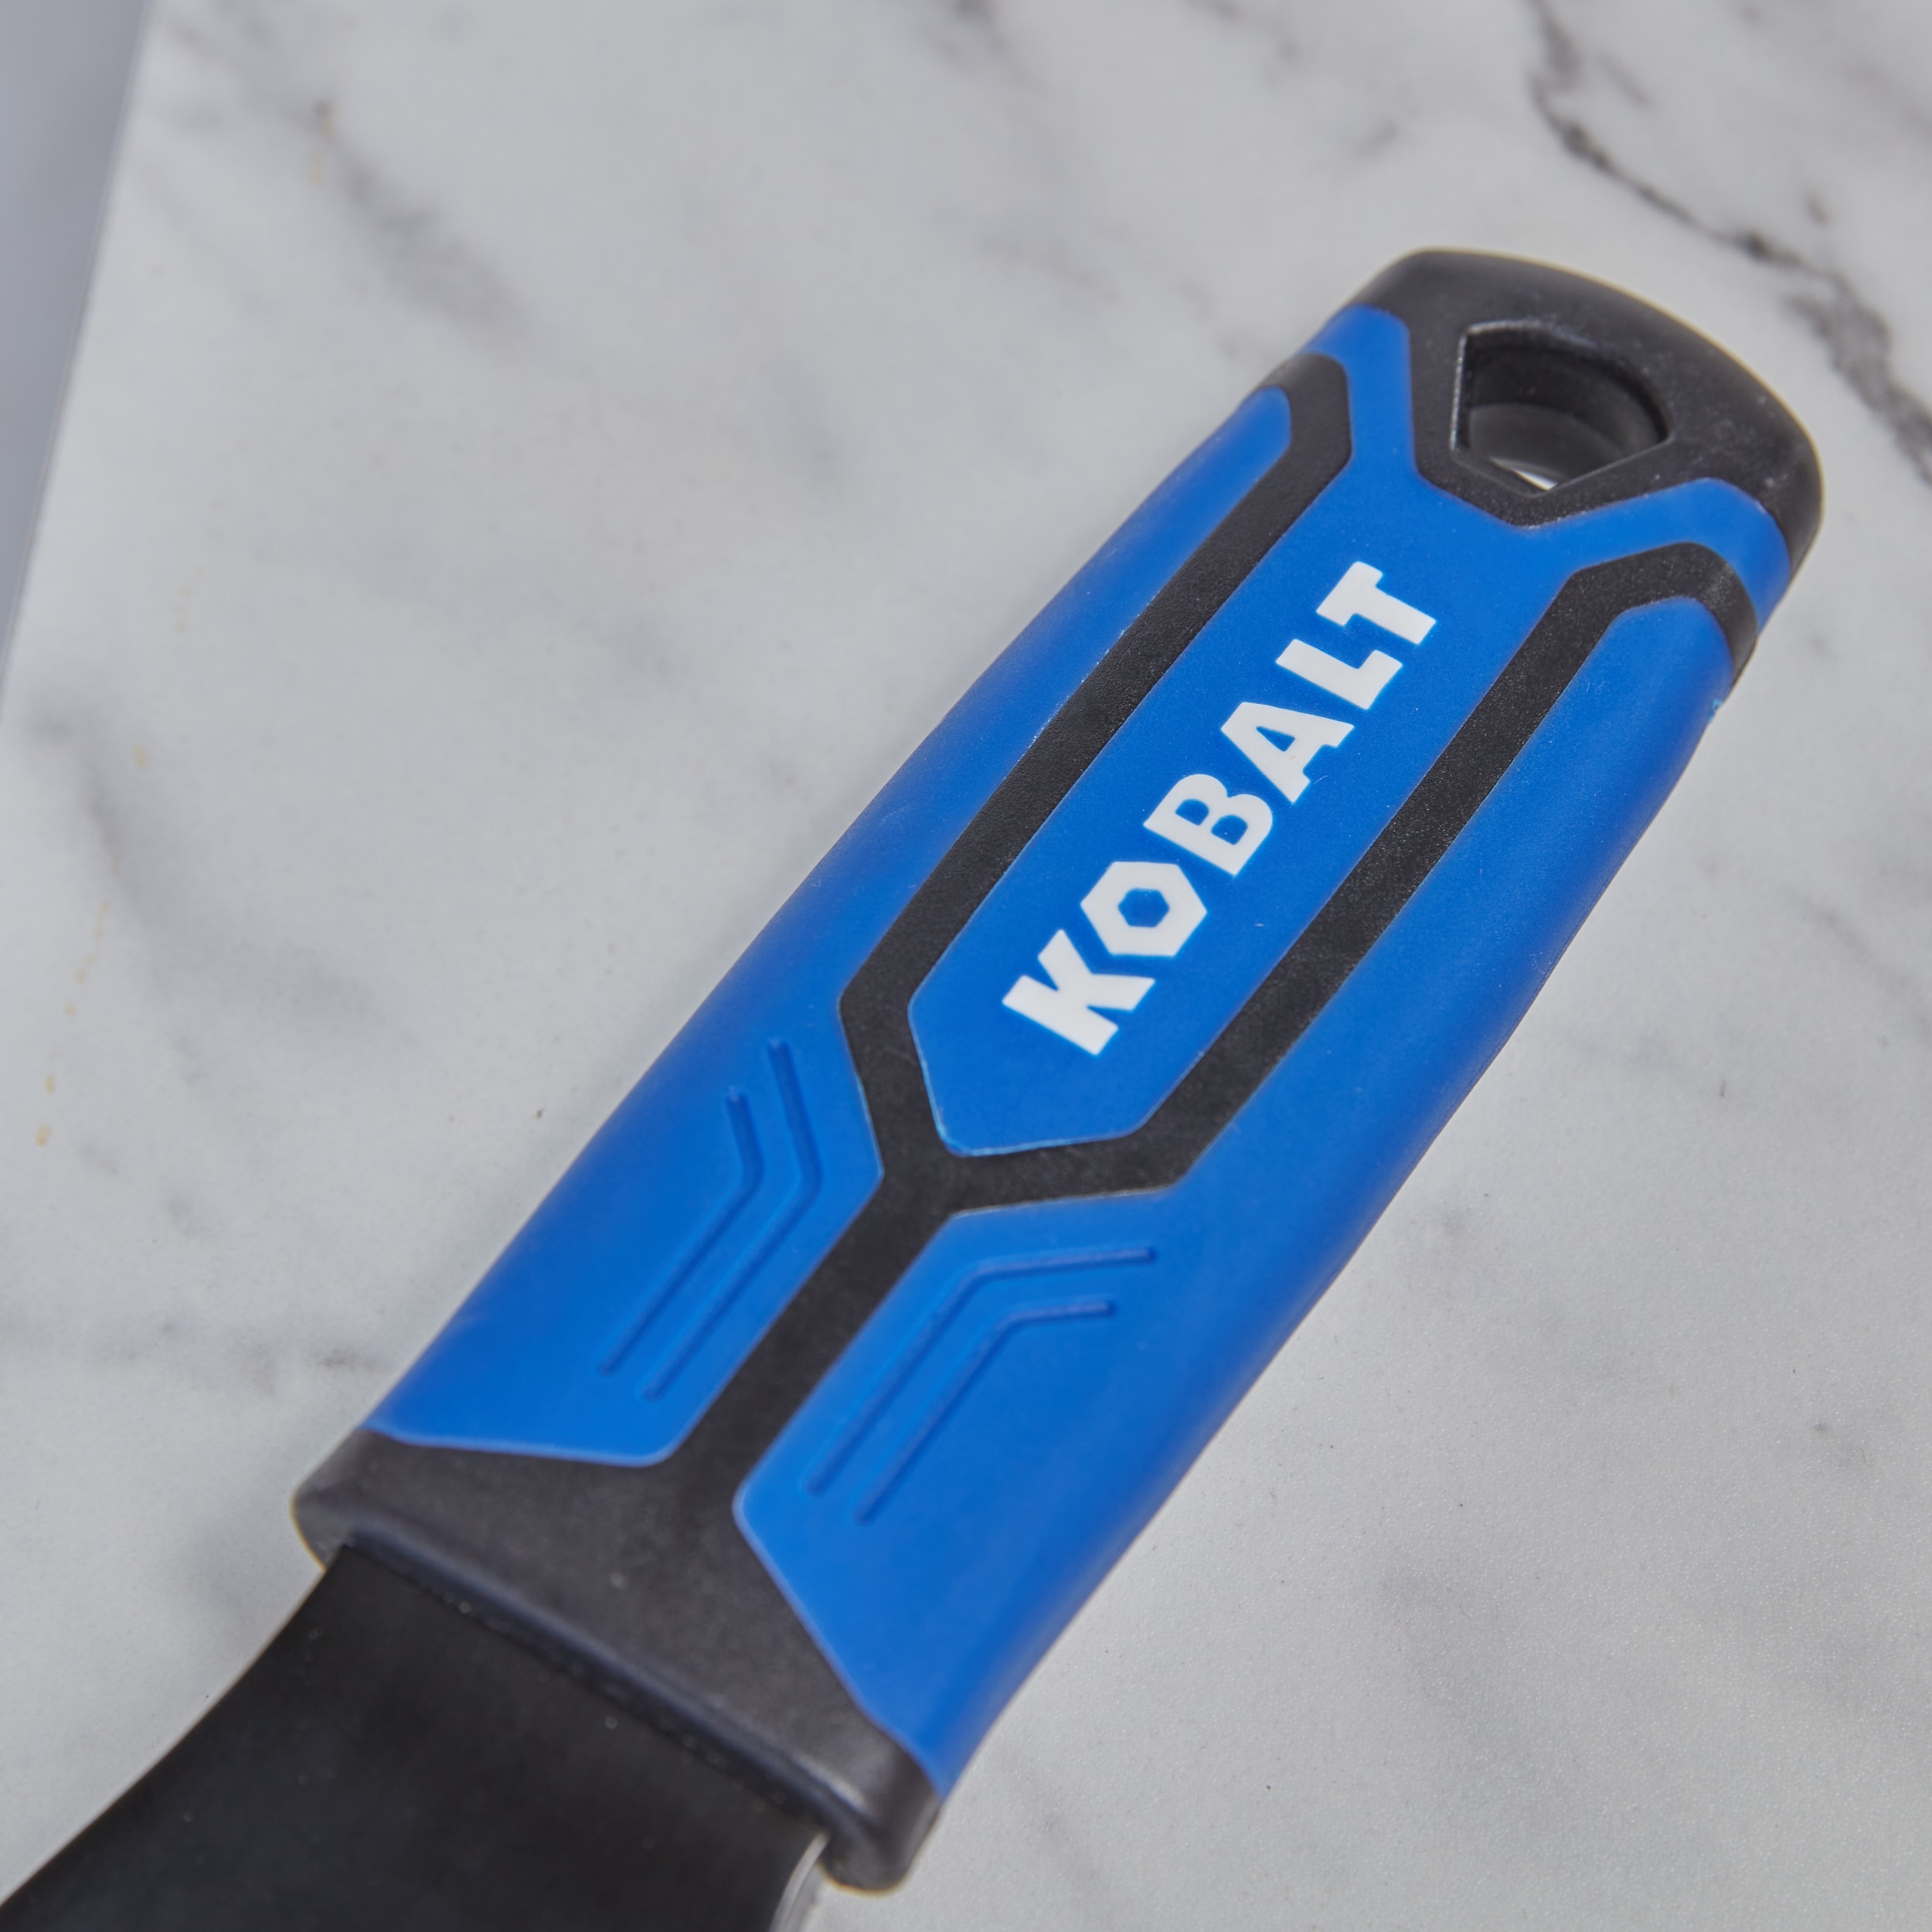 Kobalt Wrench in the Plumbing Wrenches & Specialty Tools